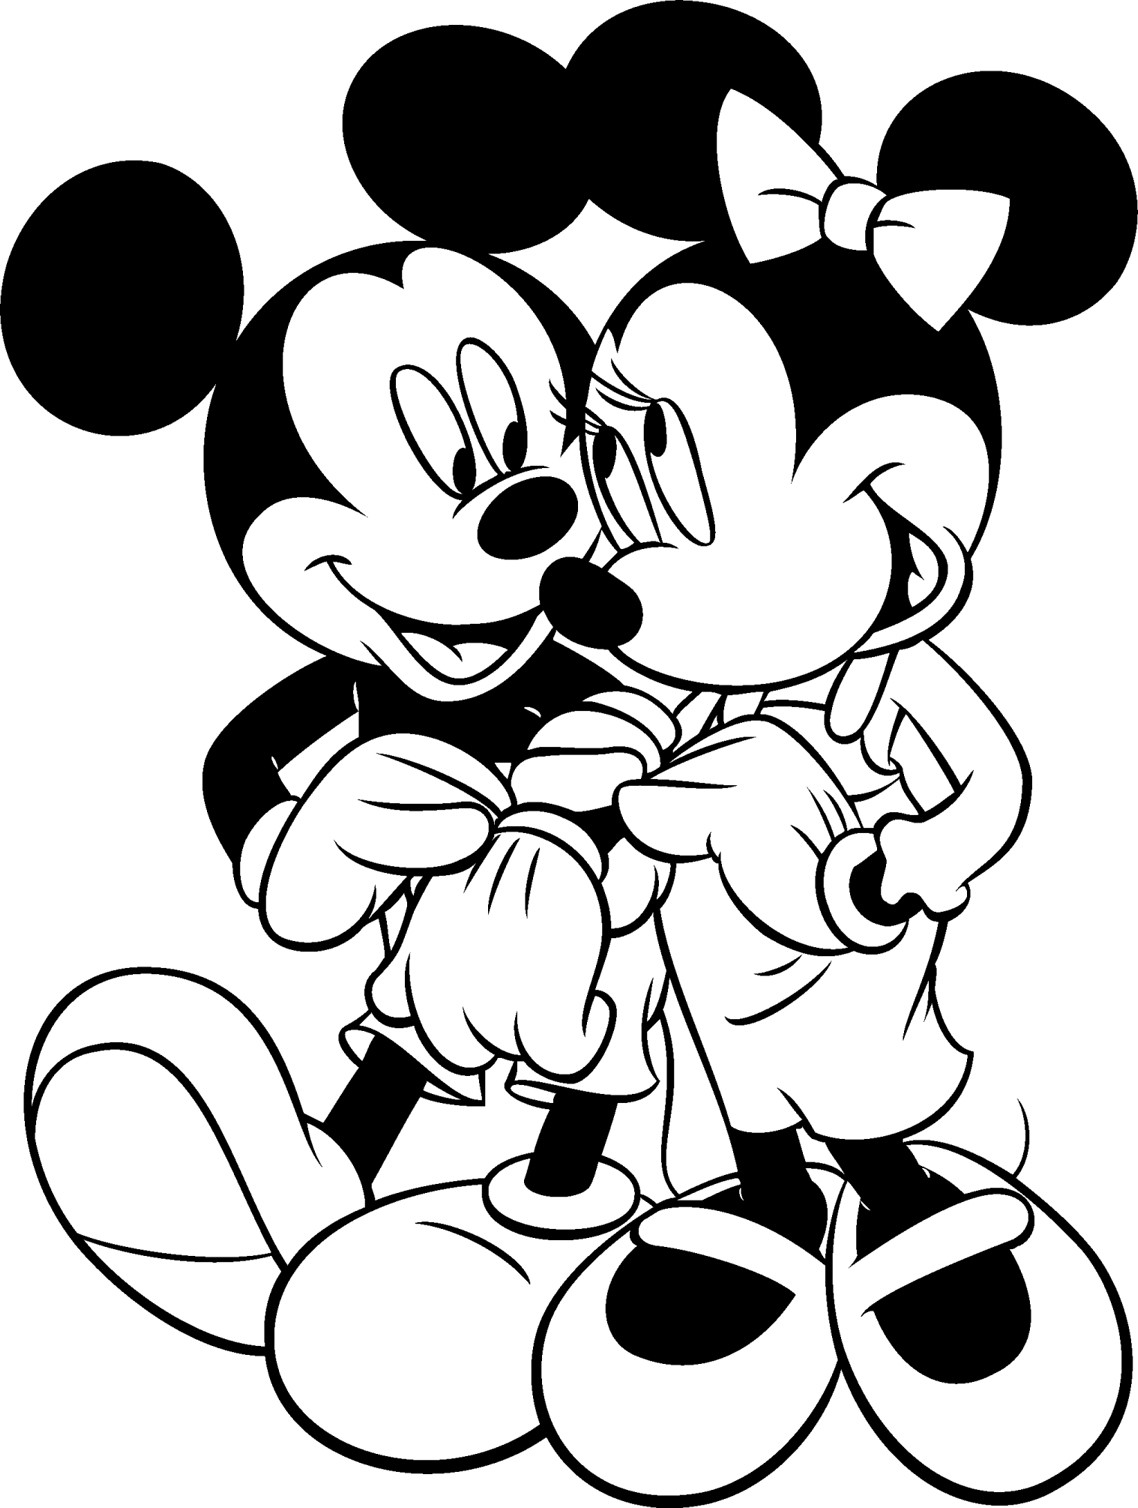 Disney Printable Coloring Pages
 DISNEY COLORING PAGES